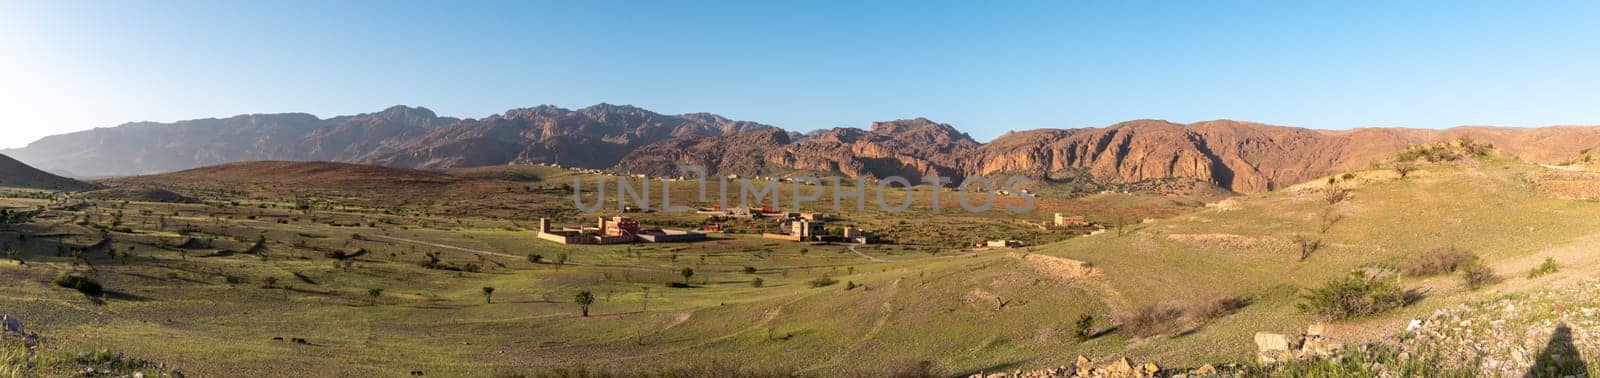 Panorama of dwellings in the Tizourgane region, mountains of the Anti-Atlas in the background, Morocco